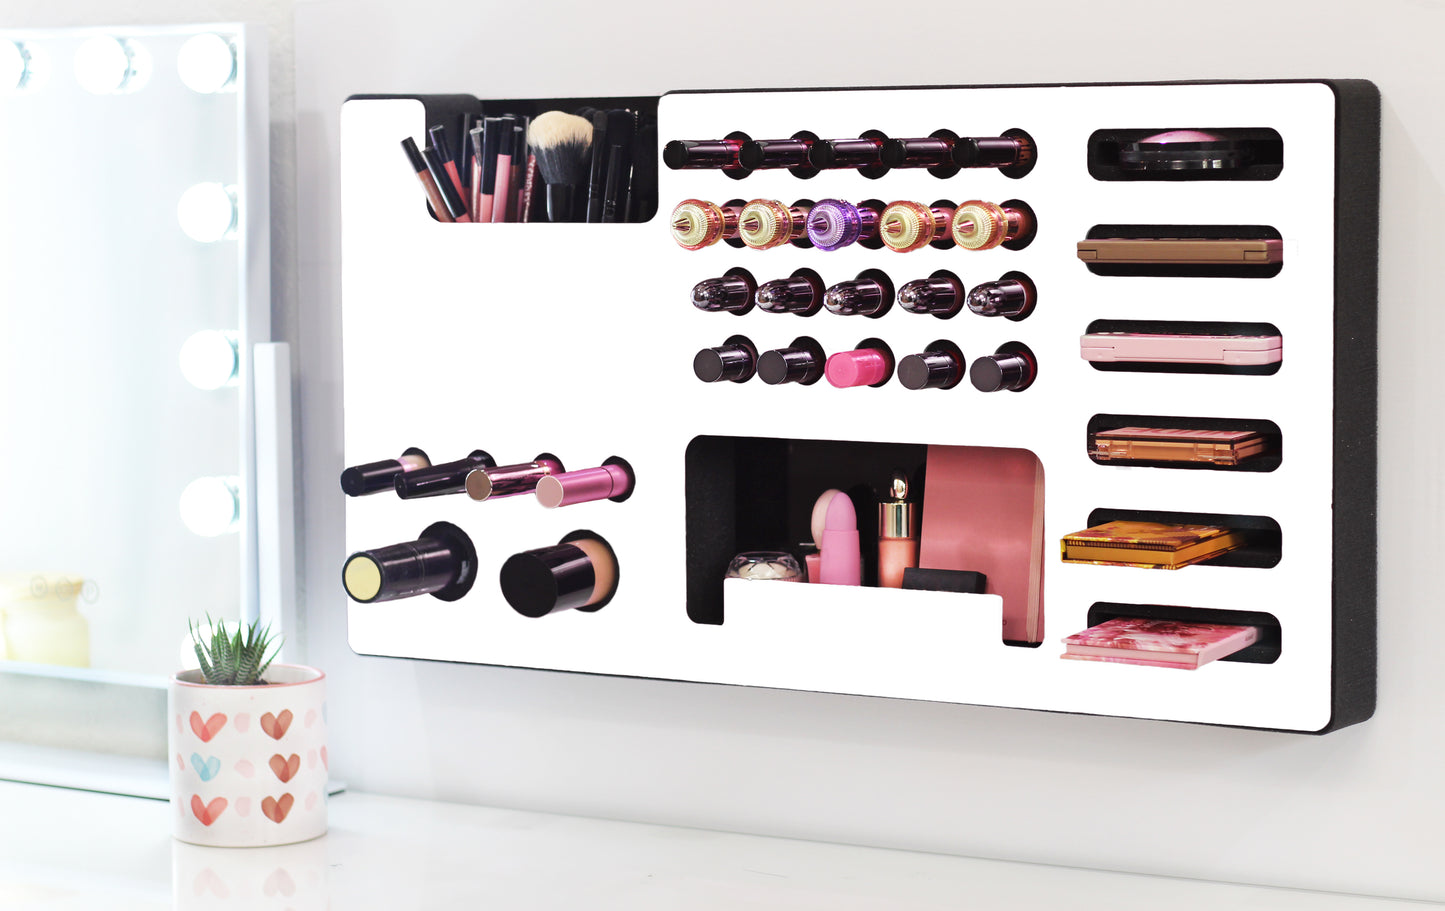 White Ultra Complete Makeup Solution Organizer shown mounted on the wall holding lipsticks, lip glosses, nail polishes, brushes, sunglasses and more by keeping items accessible and off of the counter. Shown next to a makeup vanity with samples of suggested items the organizer can hold. Tilted to the left to show depth.